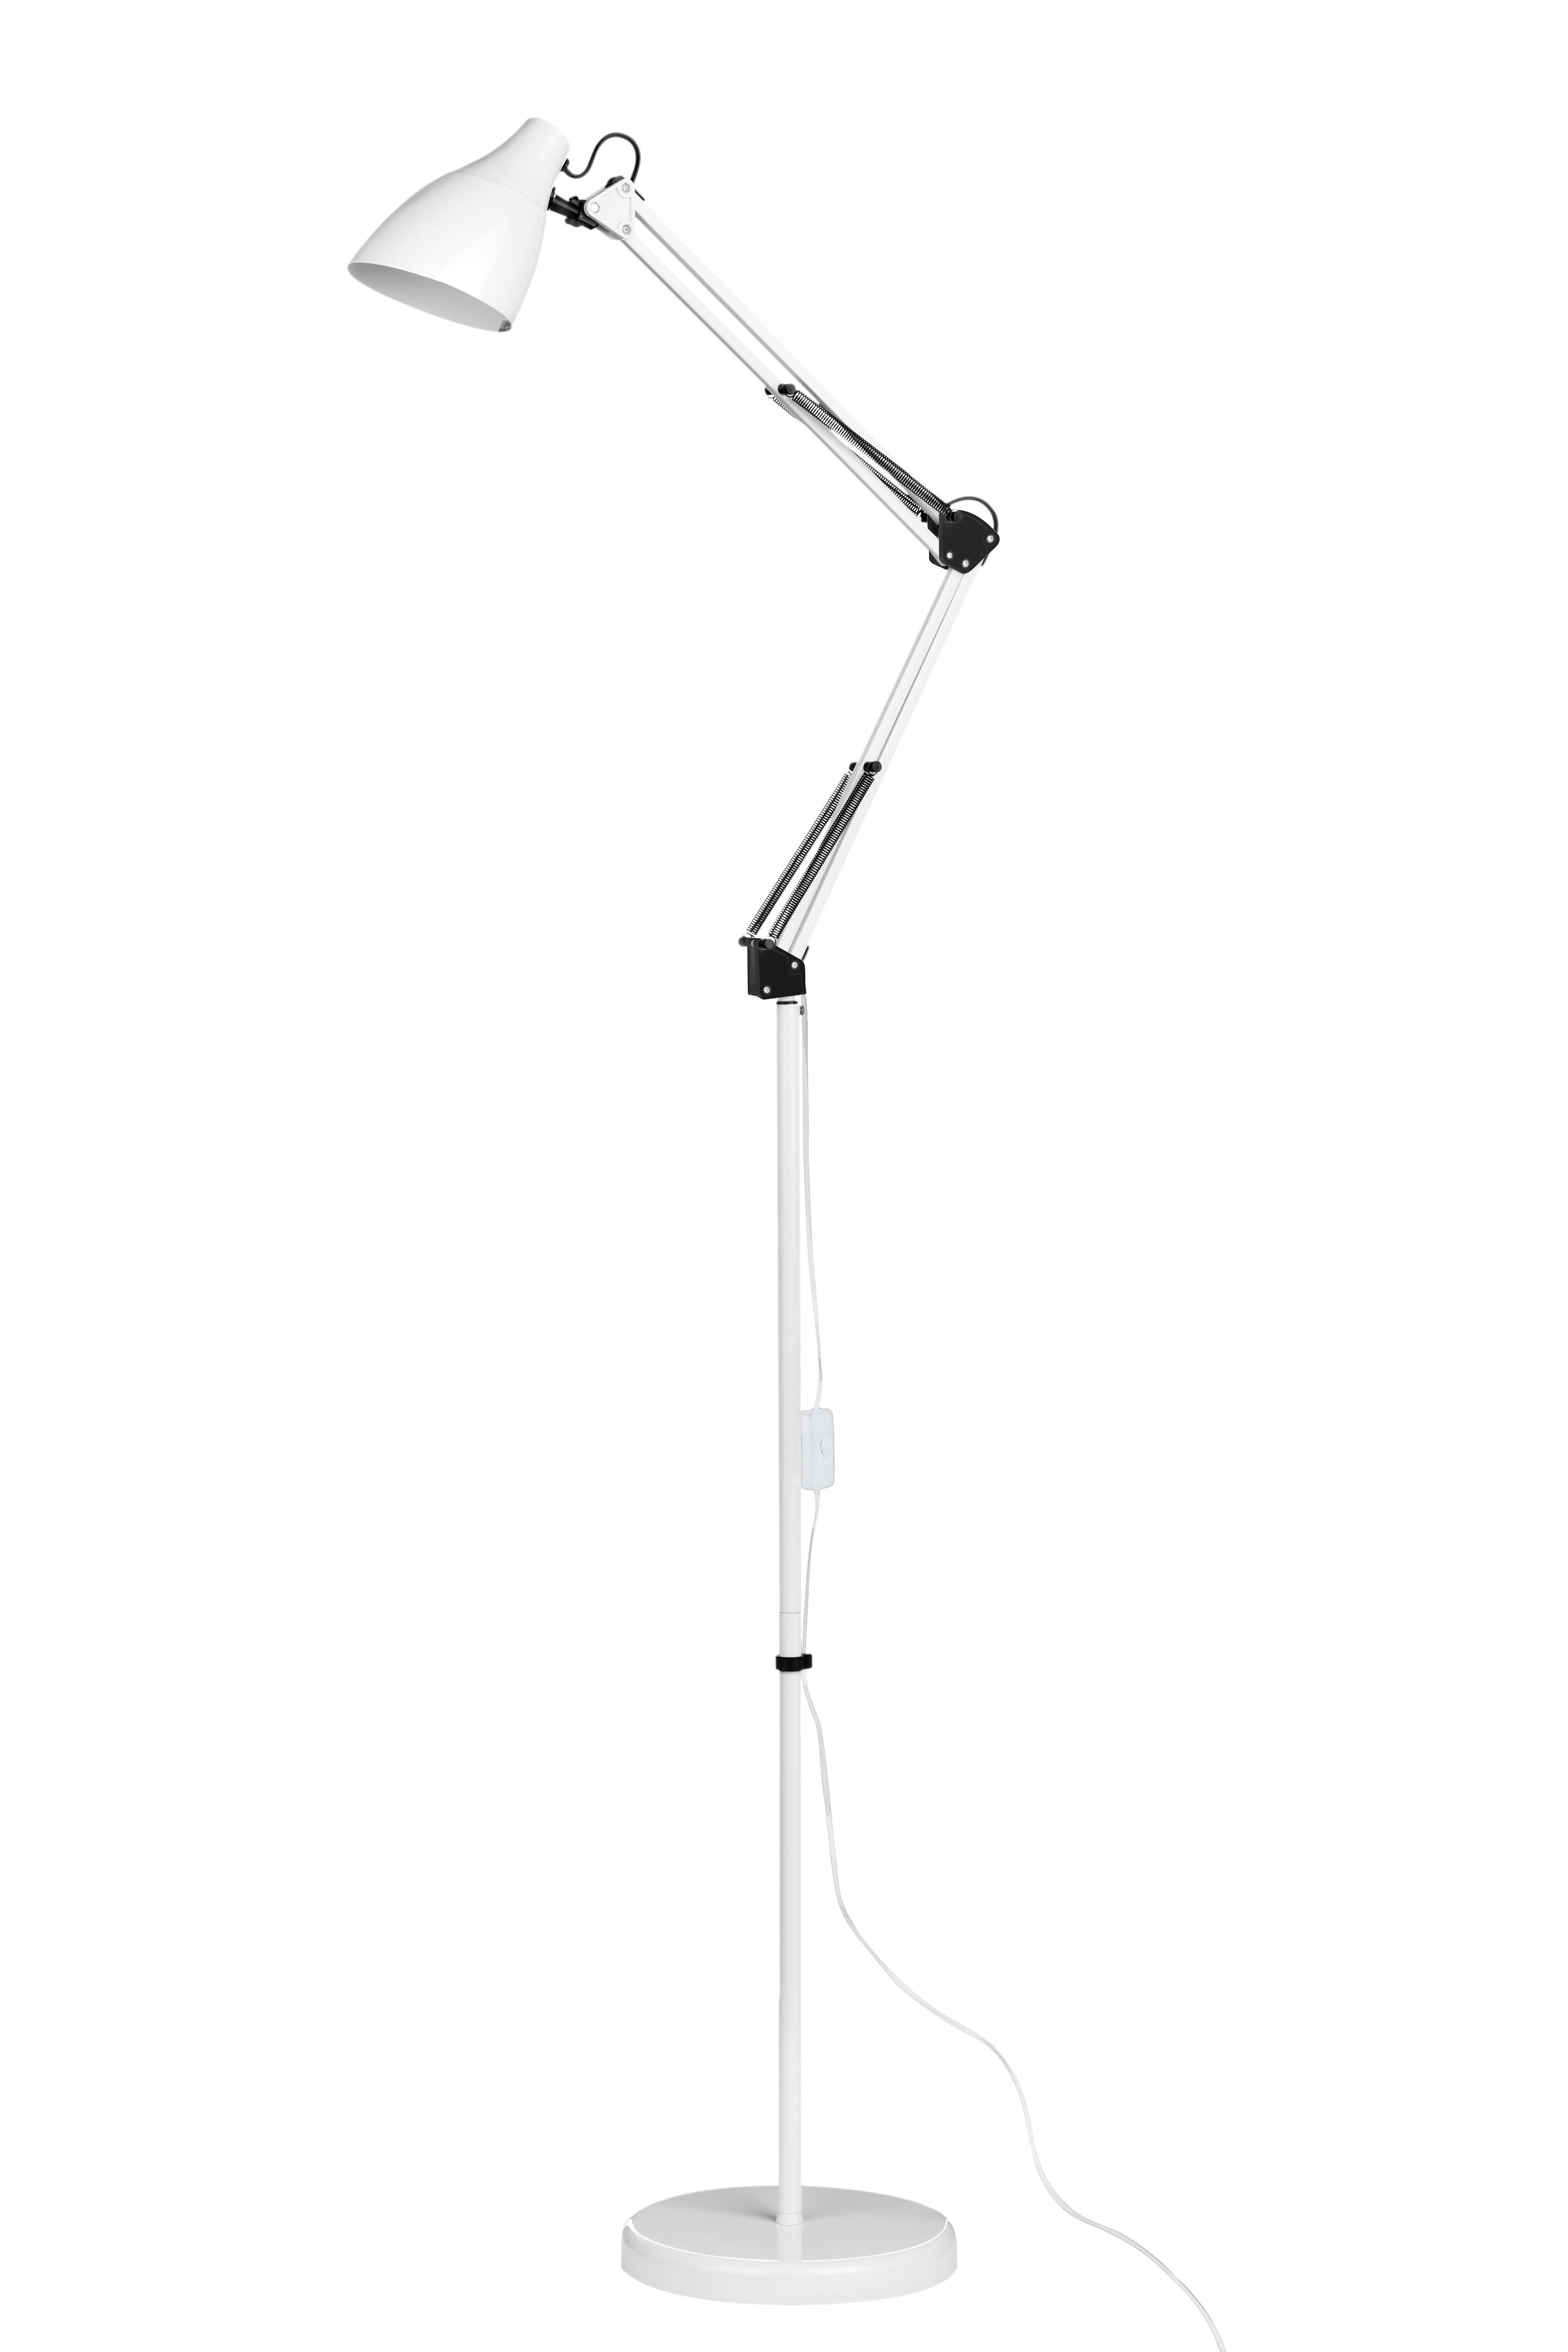 White Metal Adjustable Floor Lamp intended for size 3600 X 5400